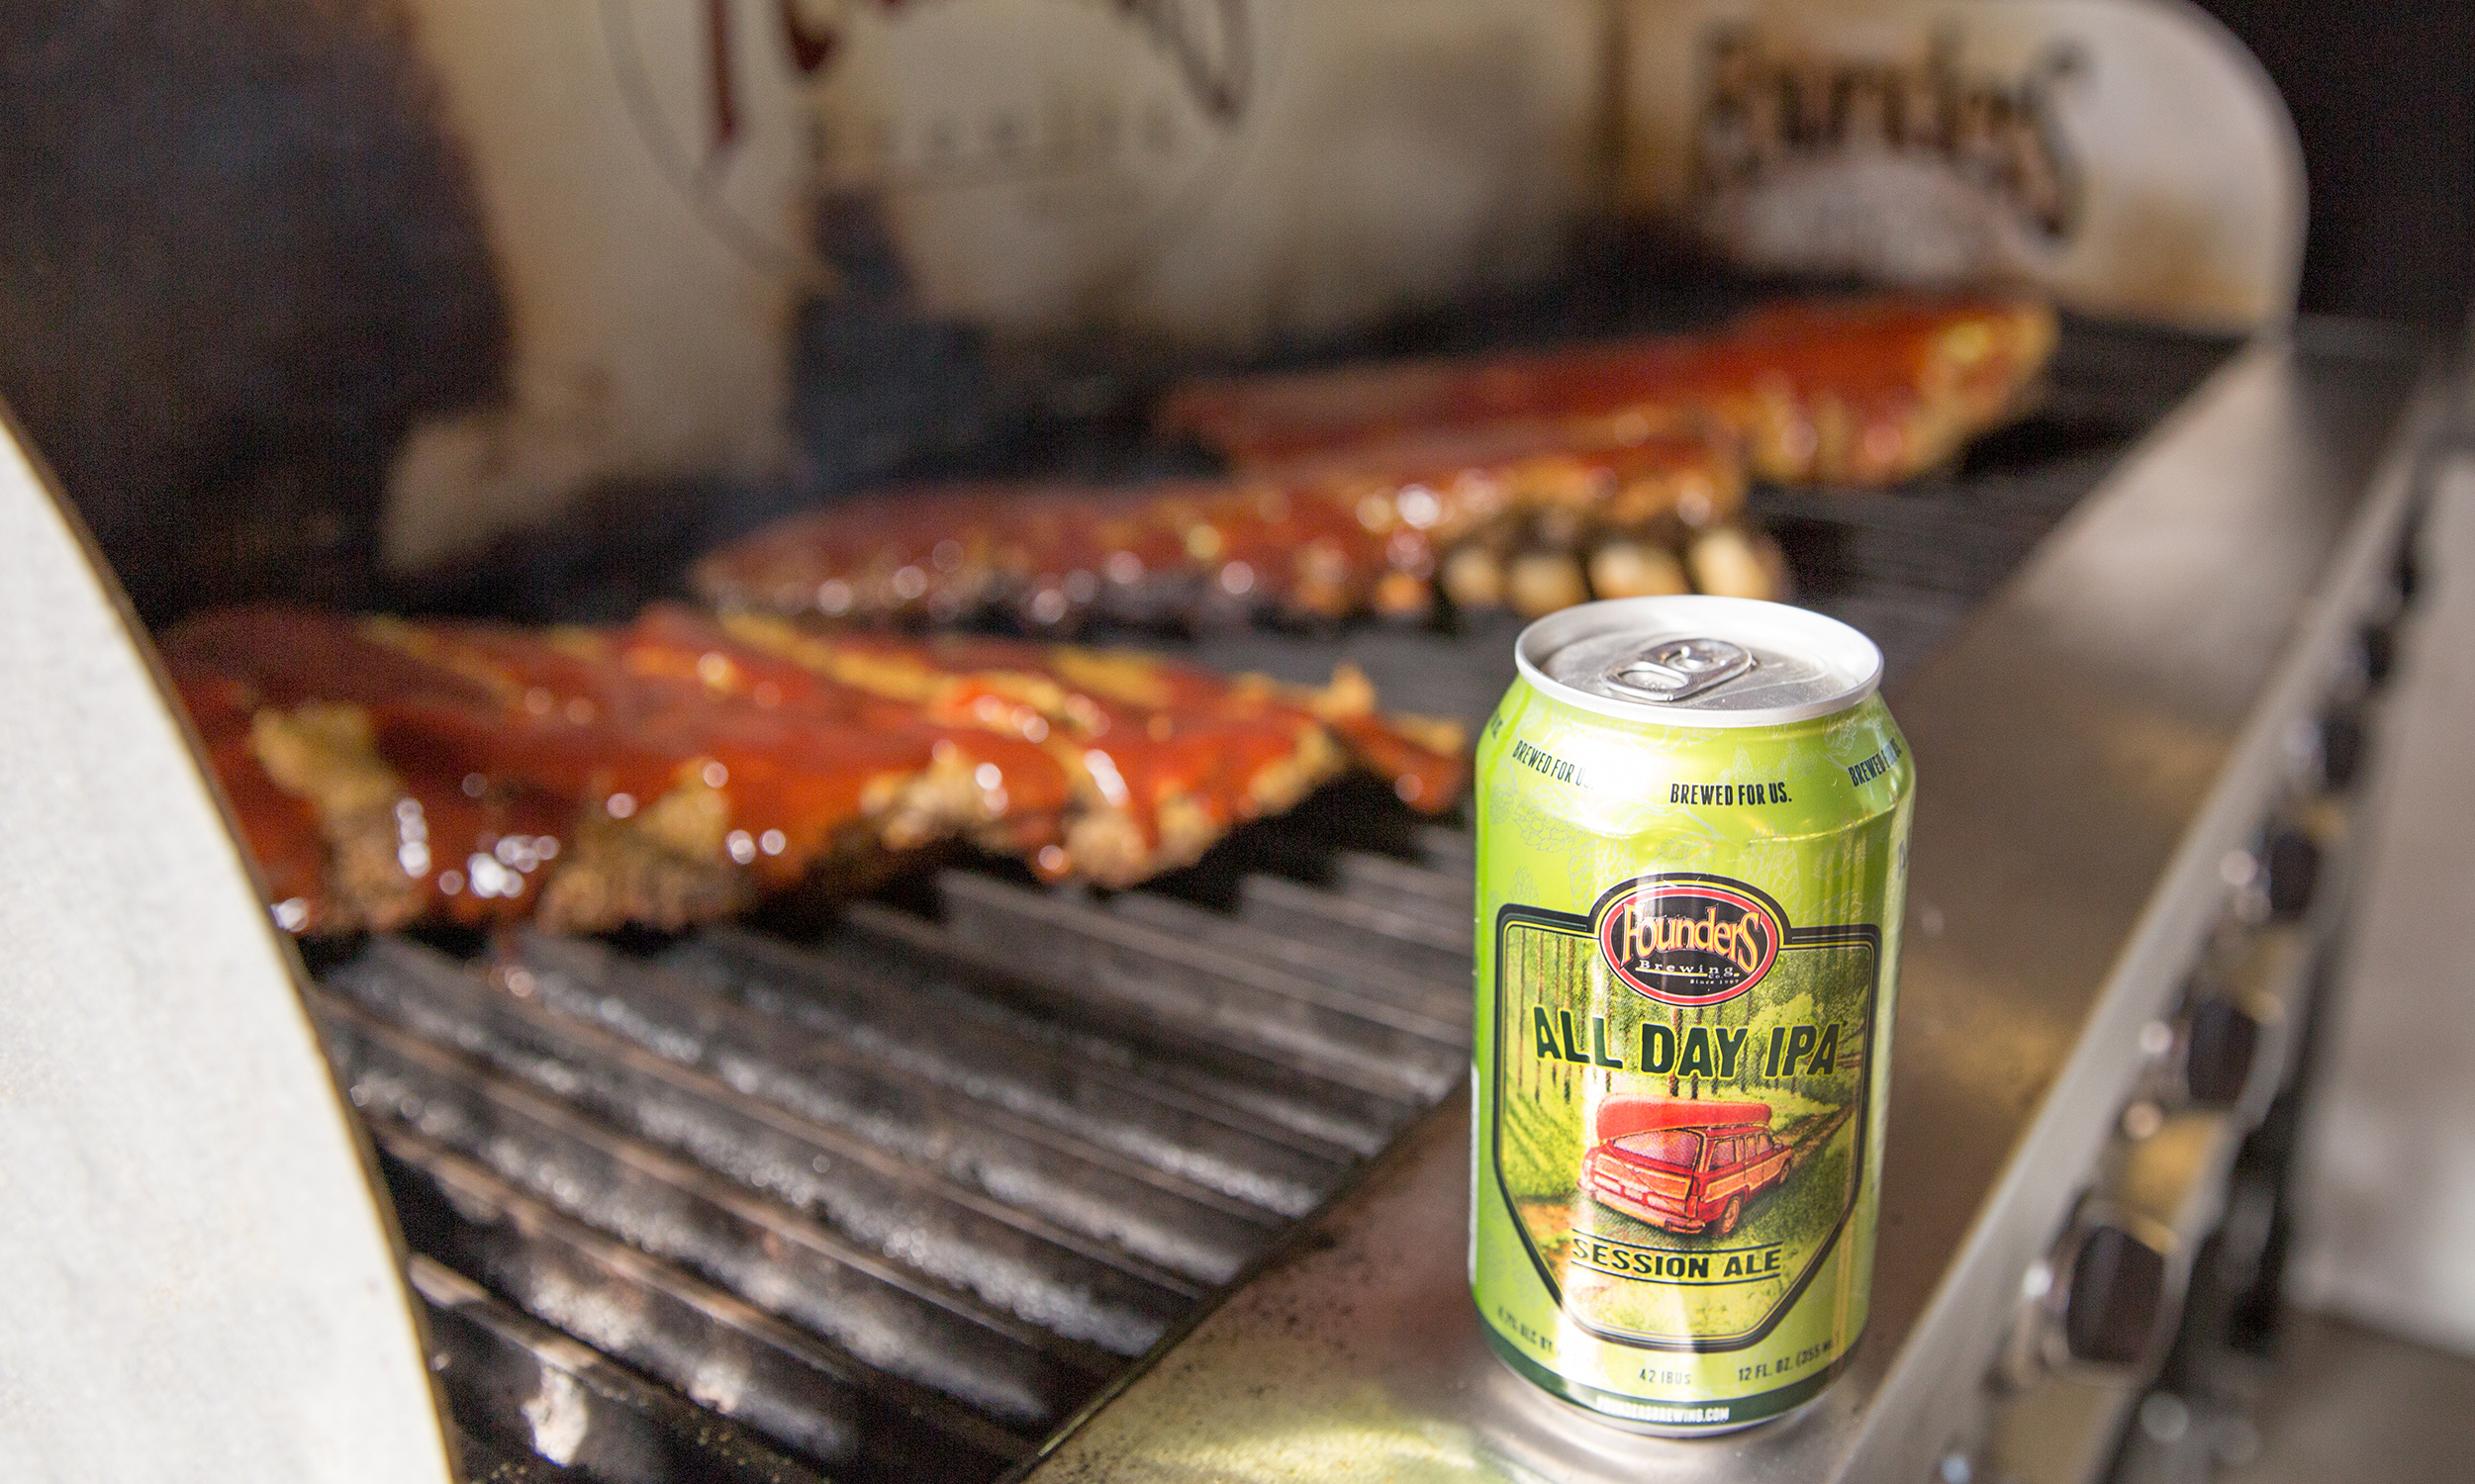 All Day IPA with Ribs on a grill